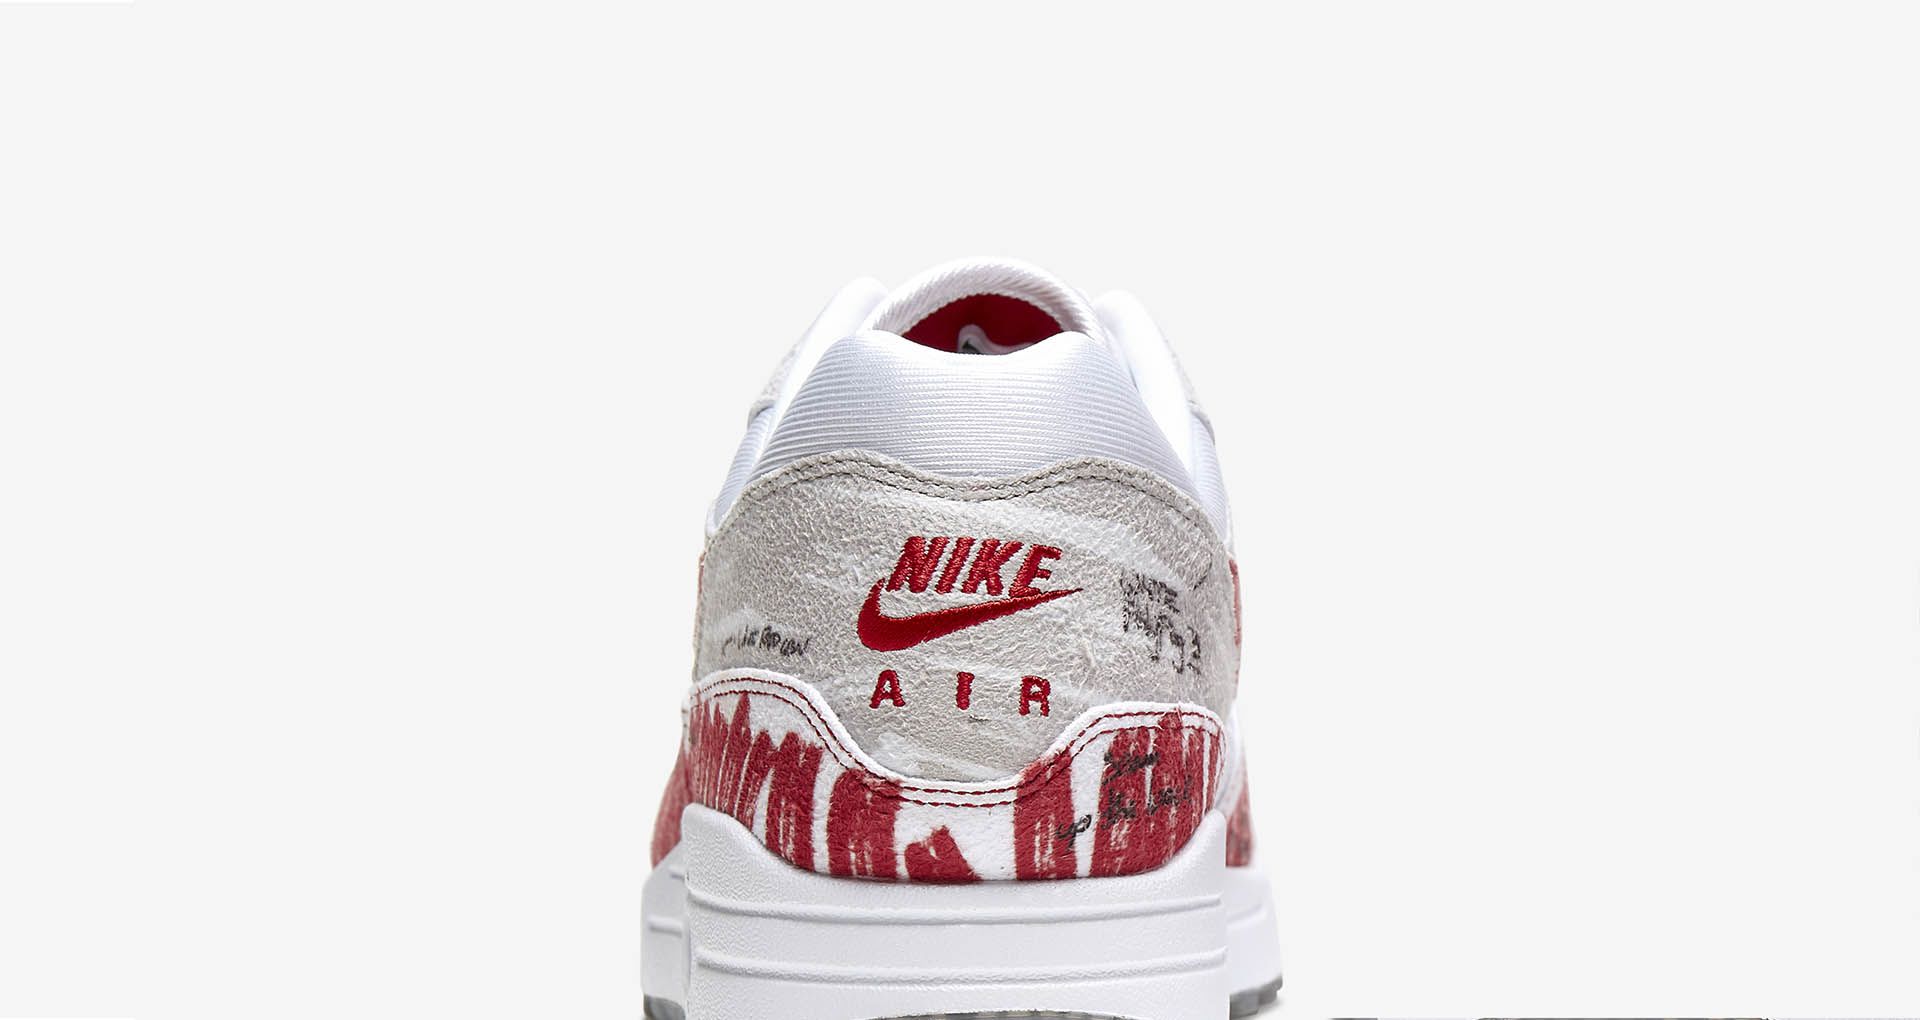 Nike Air Max 1 'Sketch to Shelf' Release Date. Nike SNKRS GB